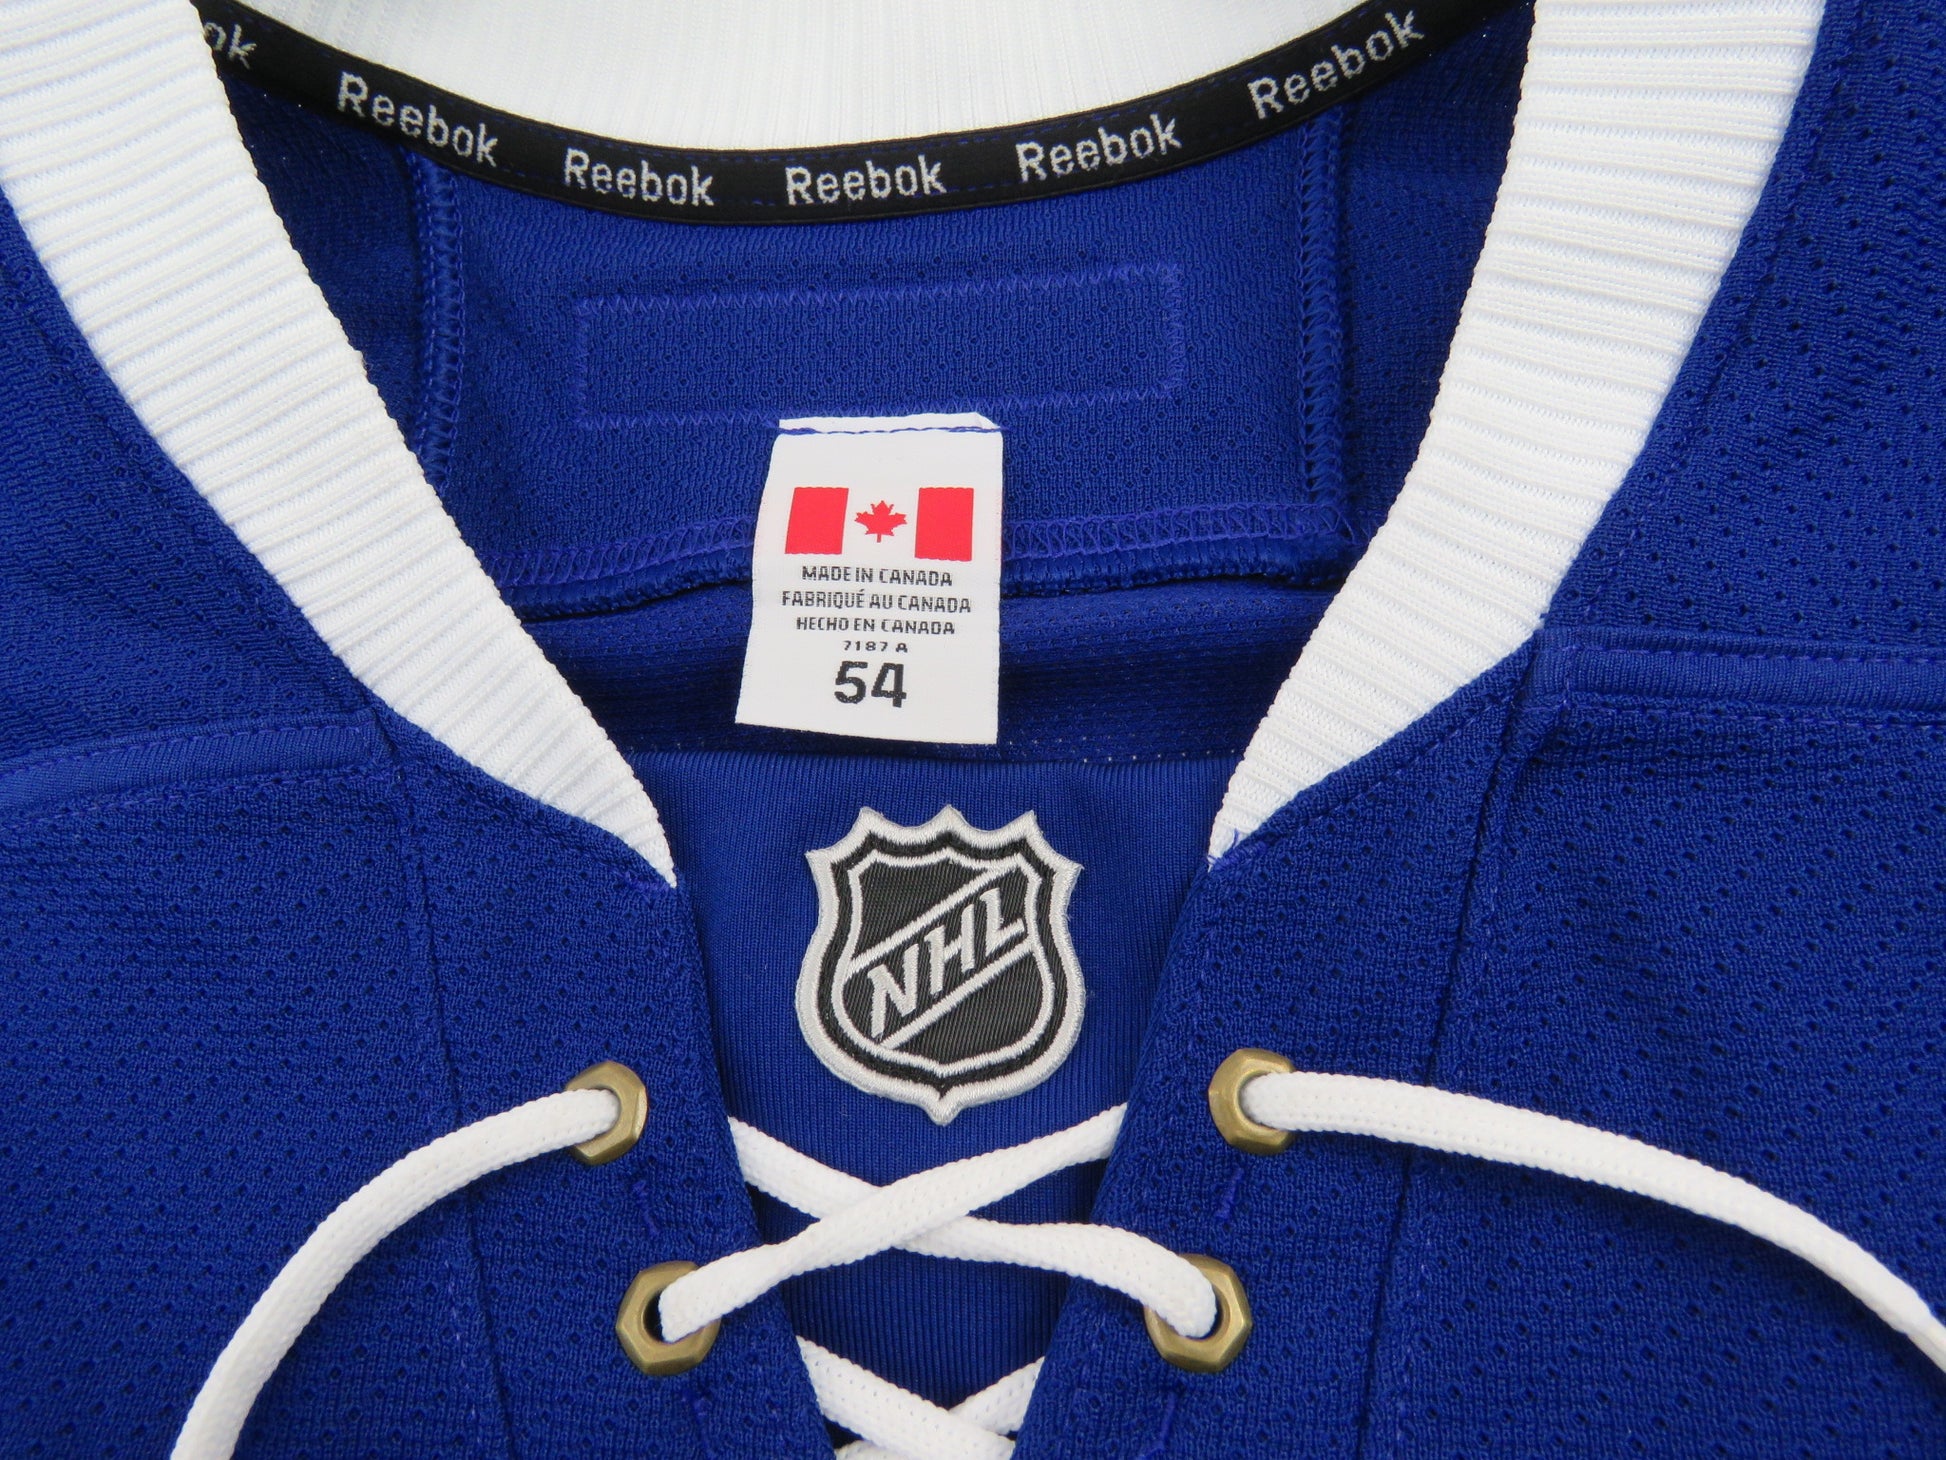 Toronto Maple Leafs Authentic NHL Practice Hockey Jersey Size 58